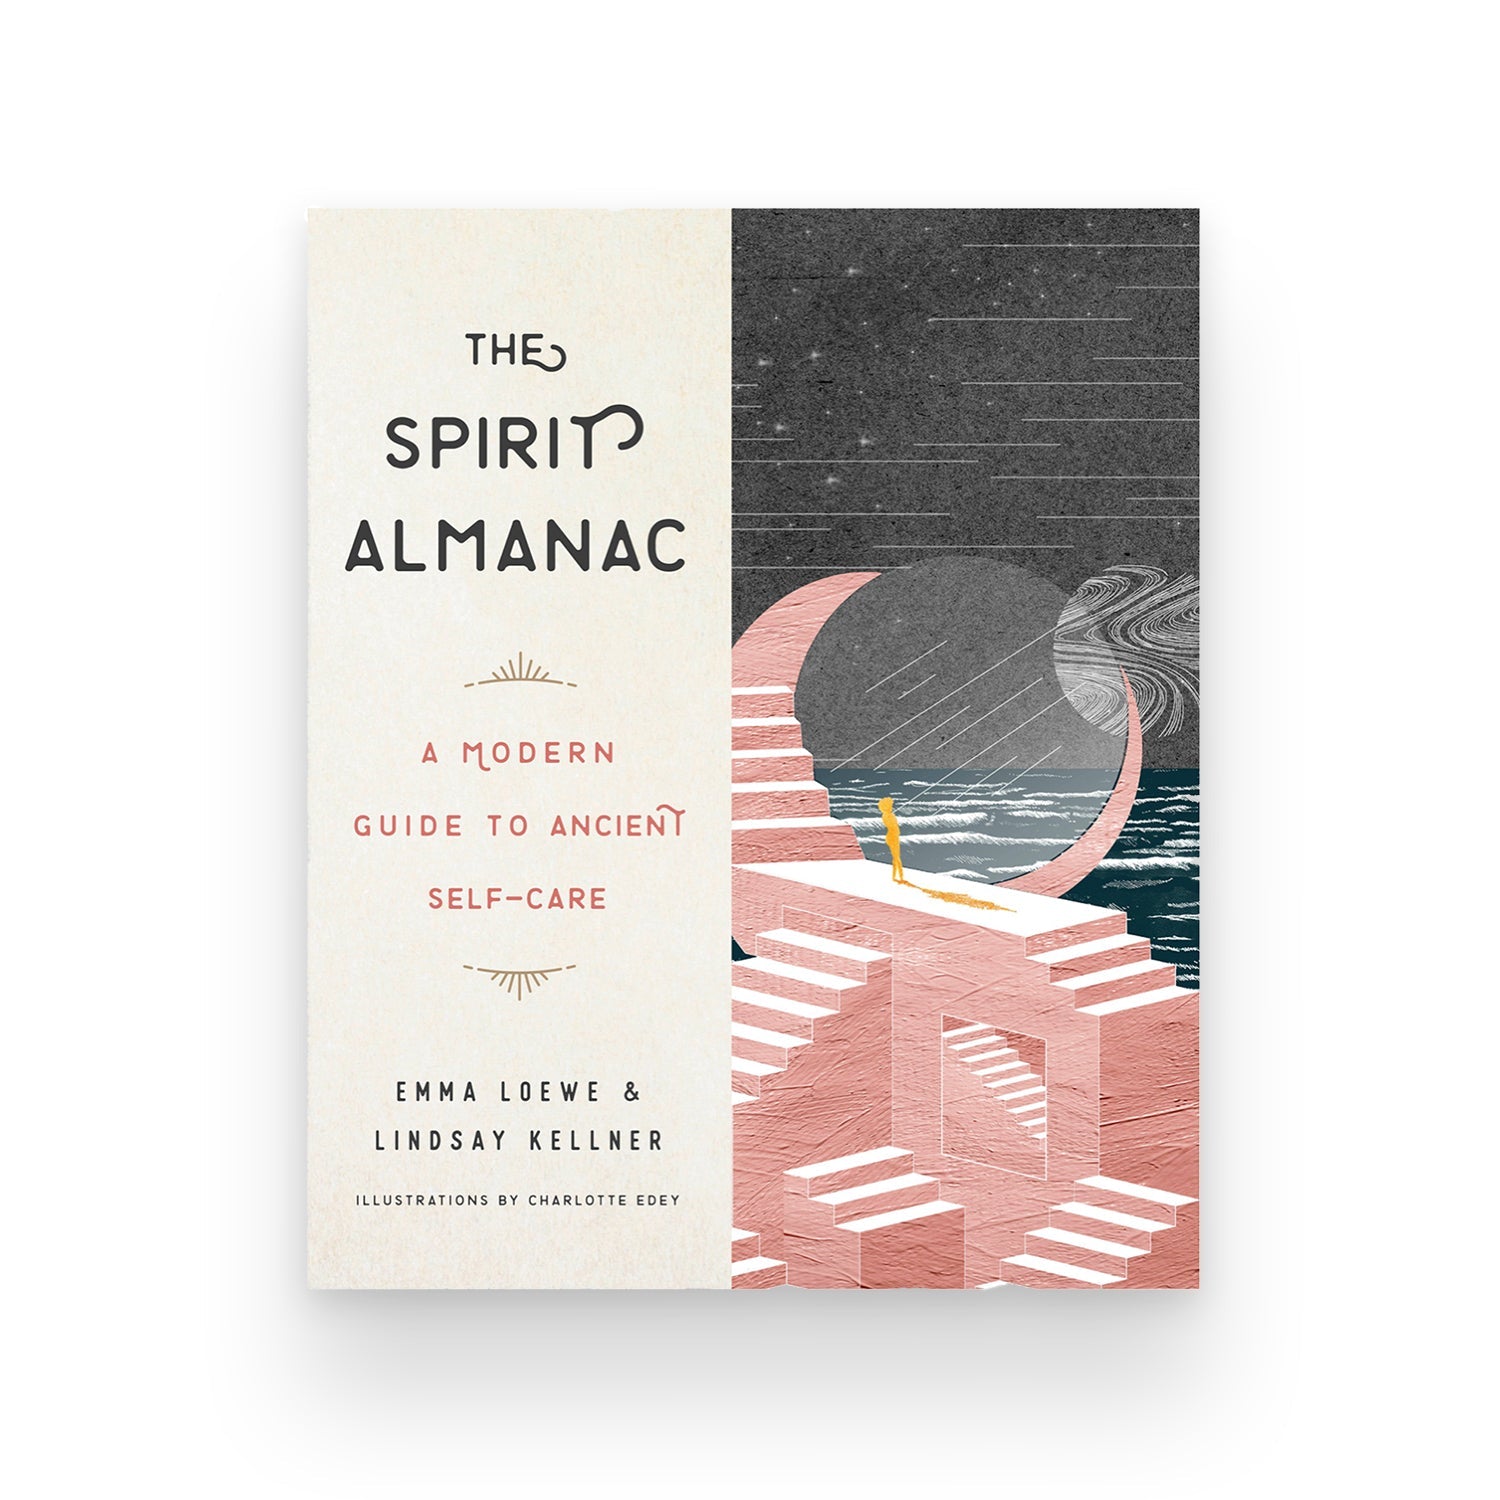 The Spirit Almanac: A Modern Guide To Ancient Self-care by Emma Loewe and Lindsay Kellner - Muse + Moonstone